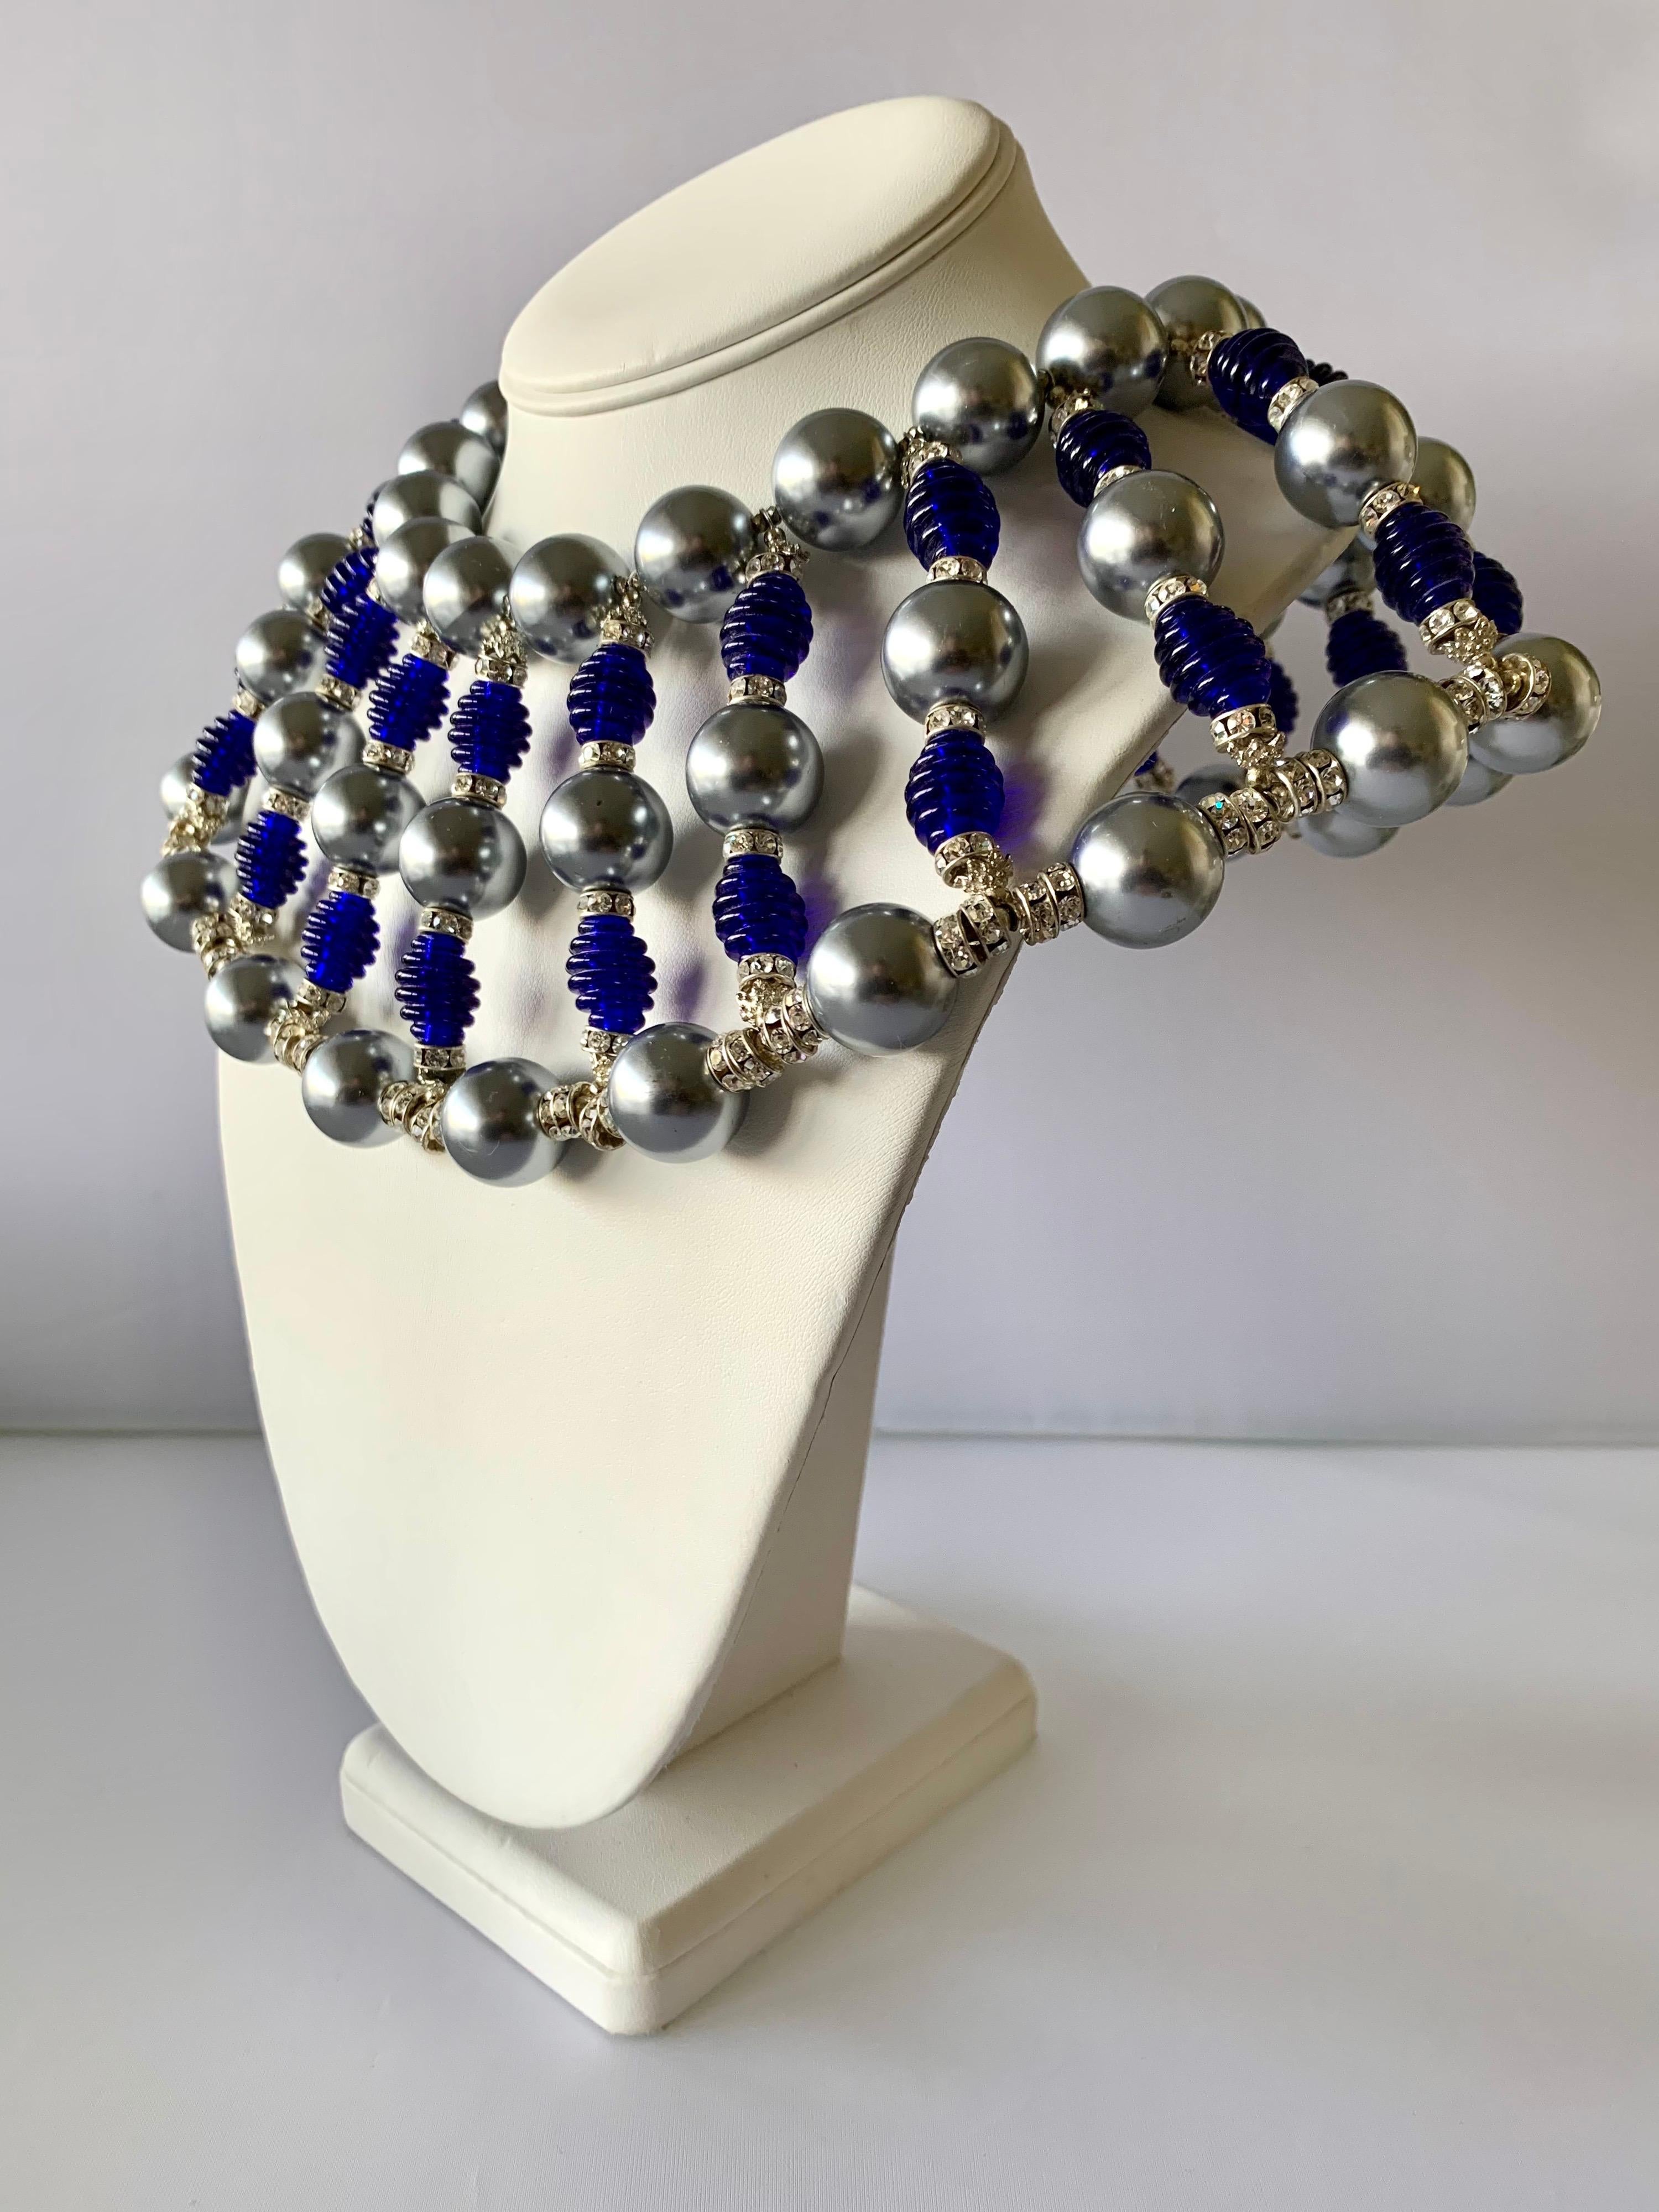 Massive vintage bib statement necklace by Robert F. Clark for William de Lillo. The necklace is comprised out of two rows of large metallic grey pearls and an ornate beaded center Browns of grey pearls, large ribbed cobalt blue beads, and